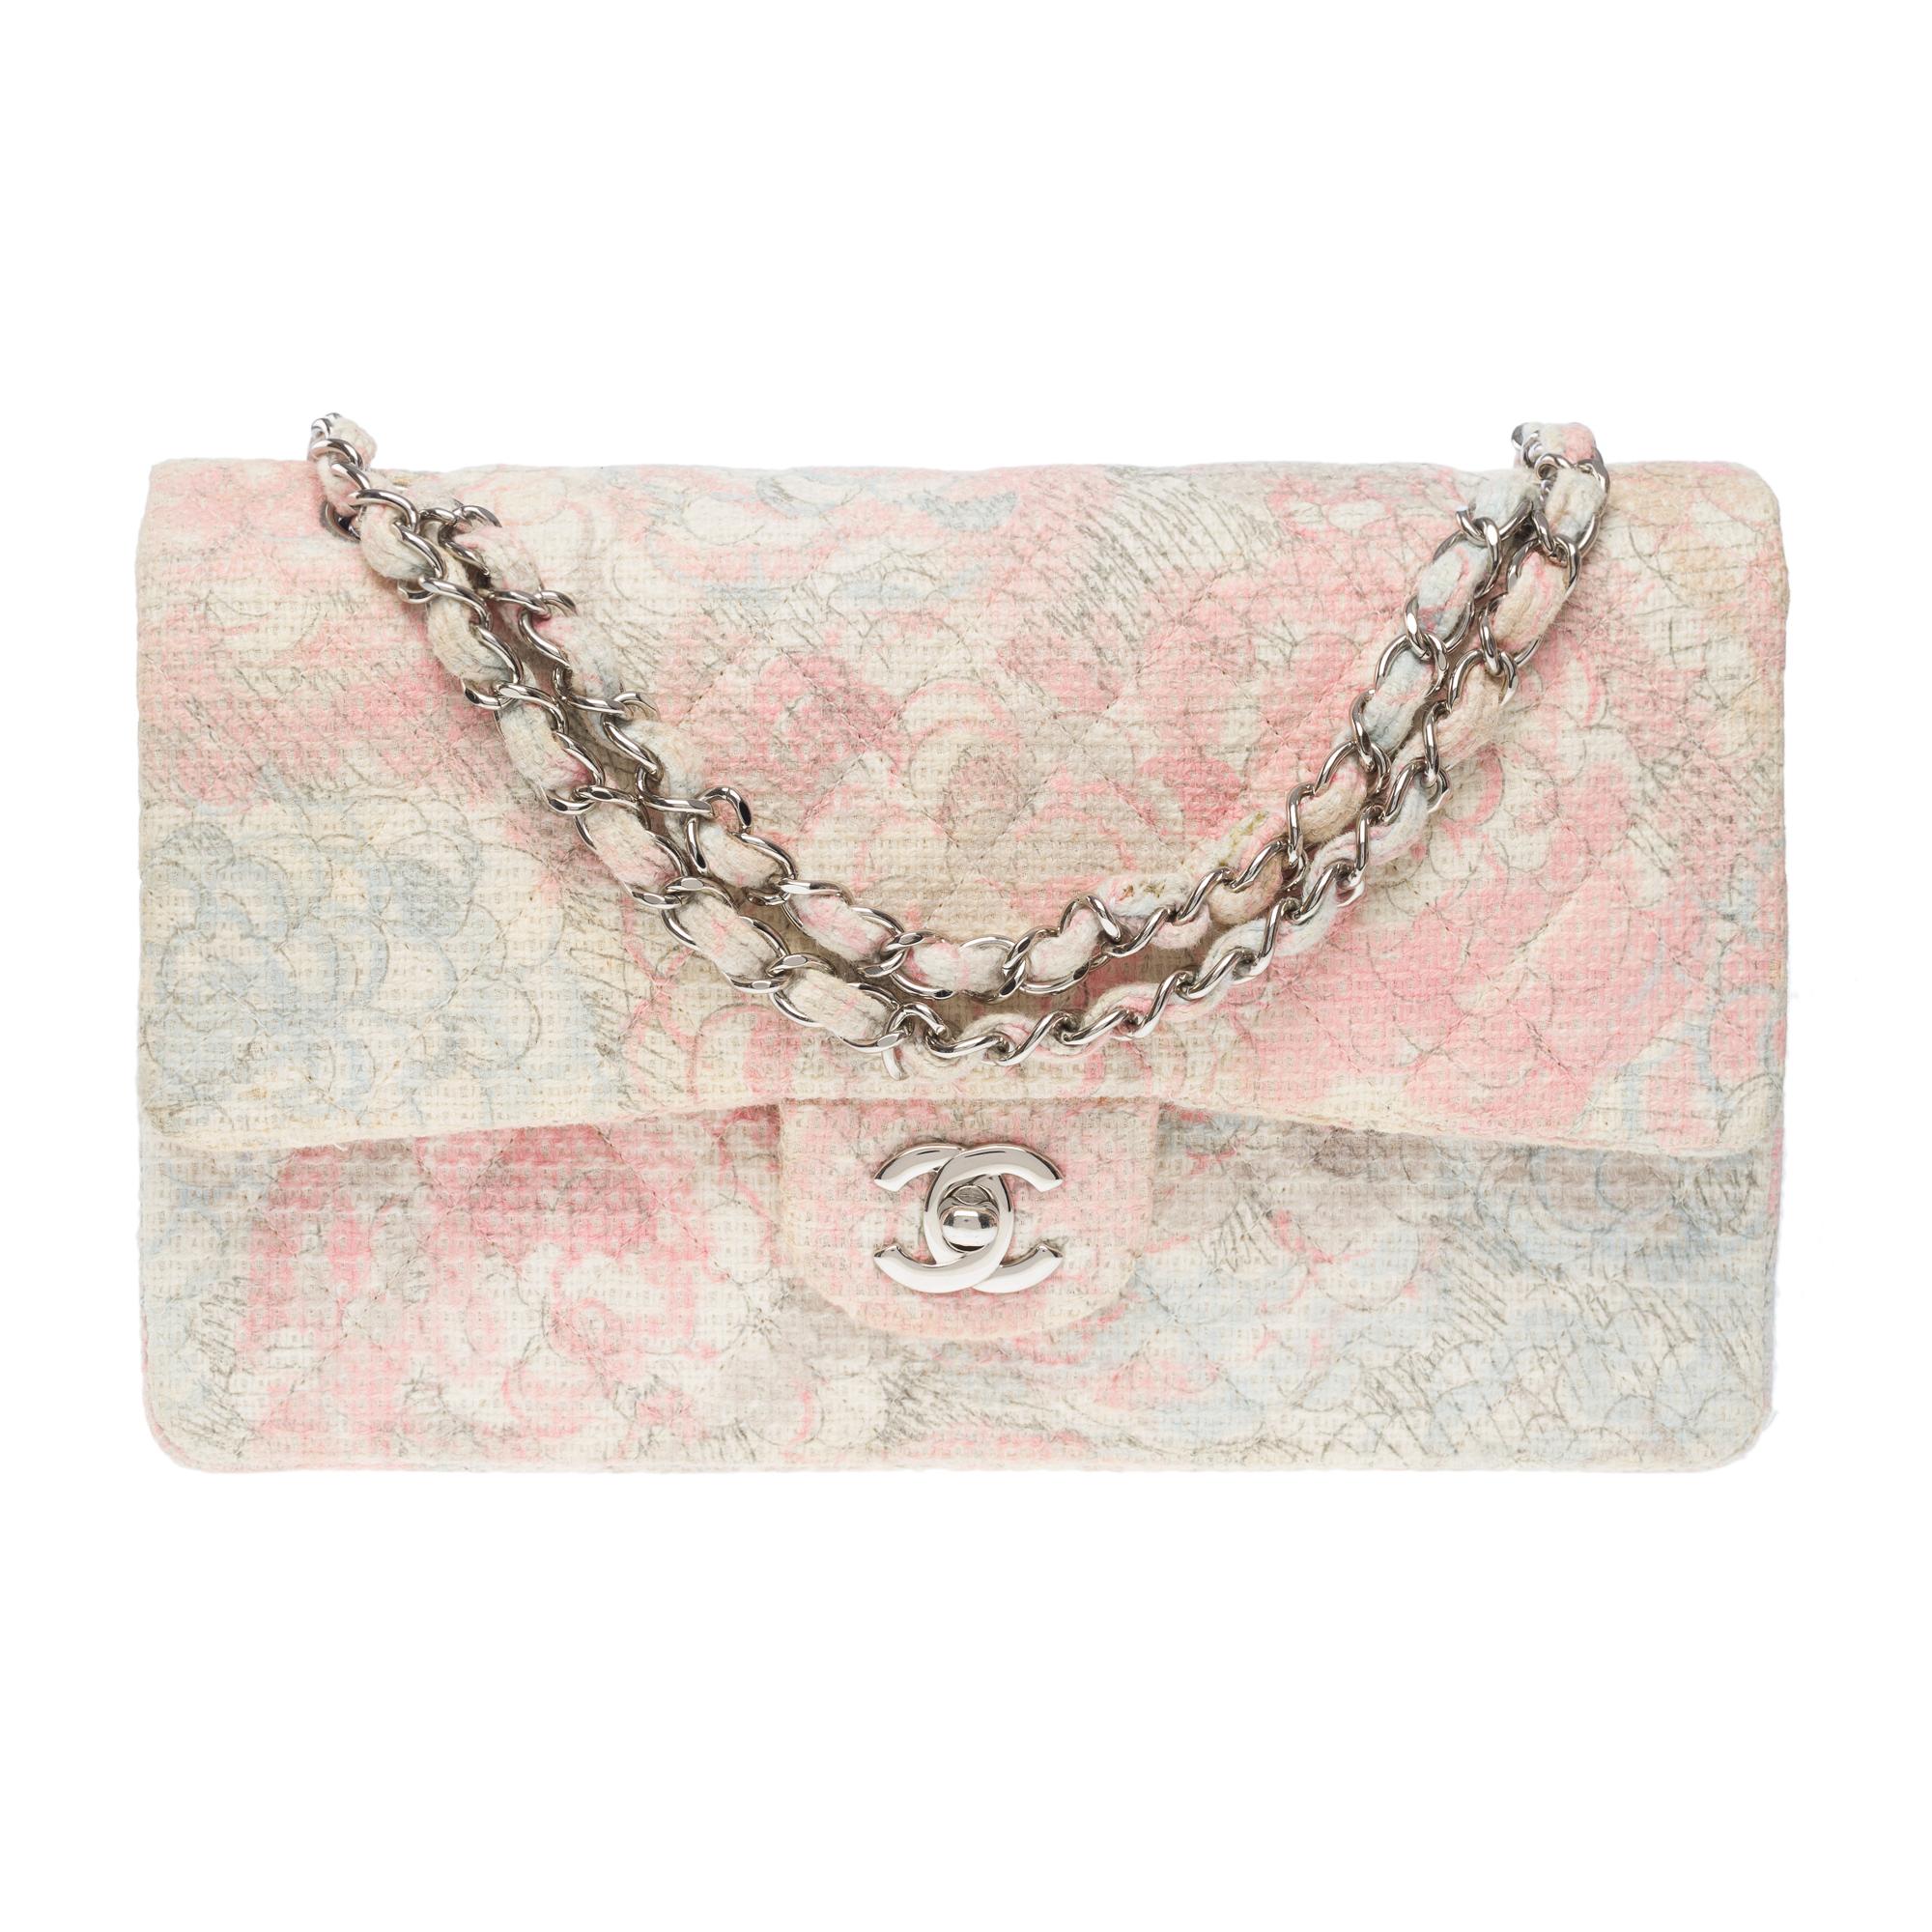 Amazing​ ​&​ ​Rare​ ​Chanel​ ​Timeless​ ​Camellia​ ​limited​ ​edition​ ​double​ ​flap​ ​shoulder​ ​bag​ ​in​ ​multicoloured​ ​quilted​ ​Tweed​ ​(pastel​ ​colors​ ​pink,​ ​gray,​ ​ivory),​ ​silver​ ​metal​ ​trim,​ ​silver​ ​metal​ ​handle​